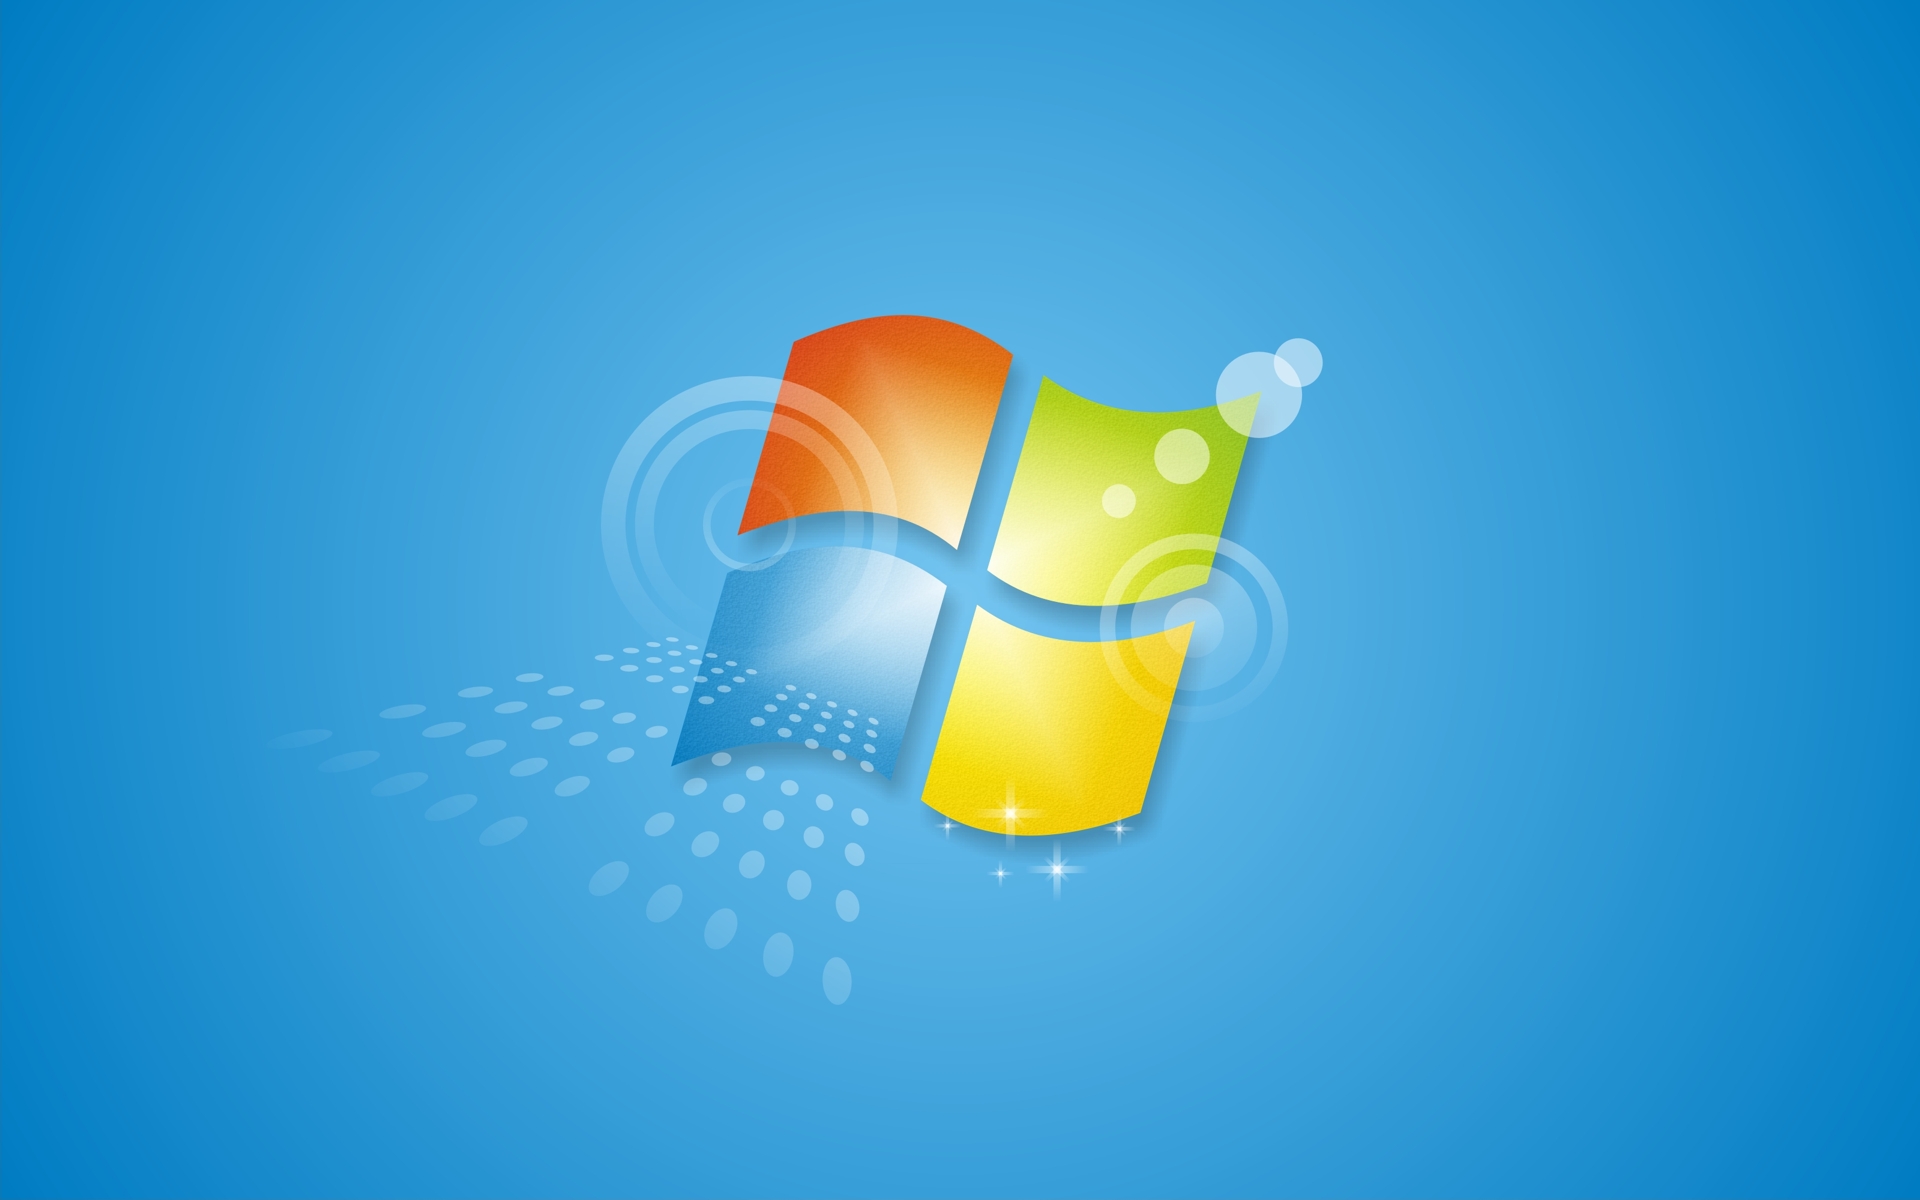 Windows 7 has replaced XP as the most popular version of ...